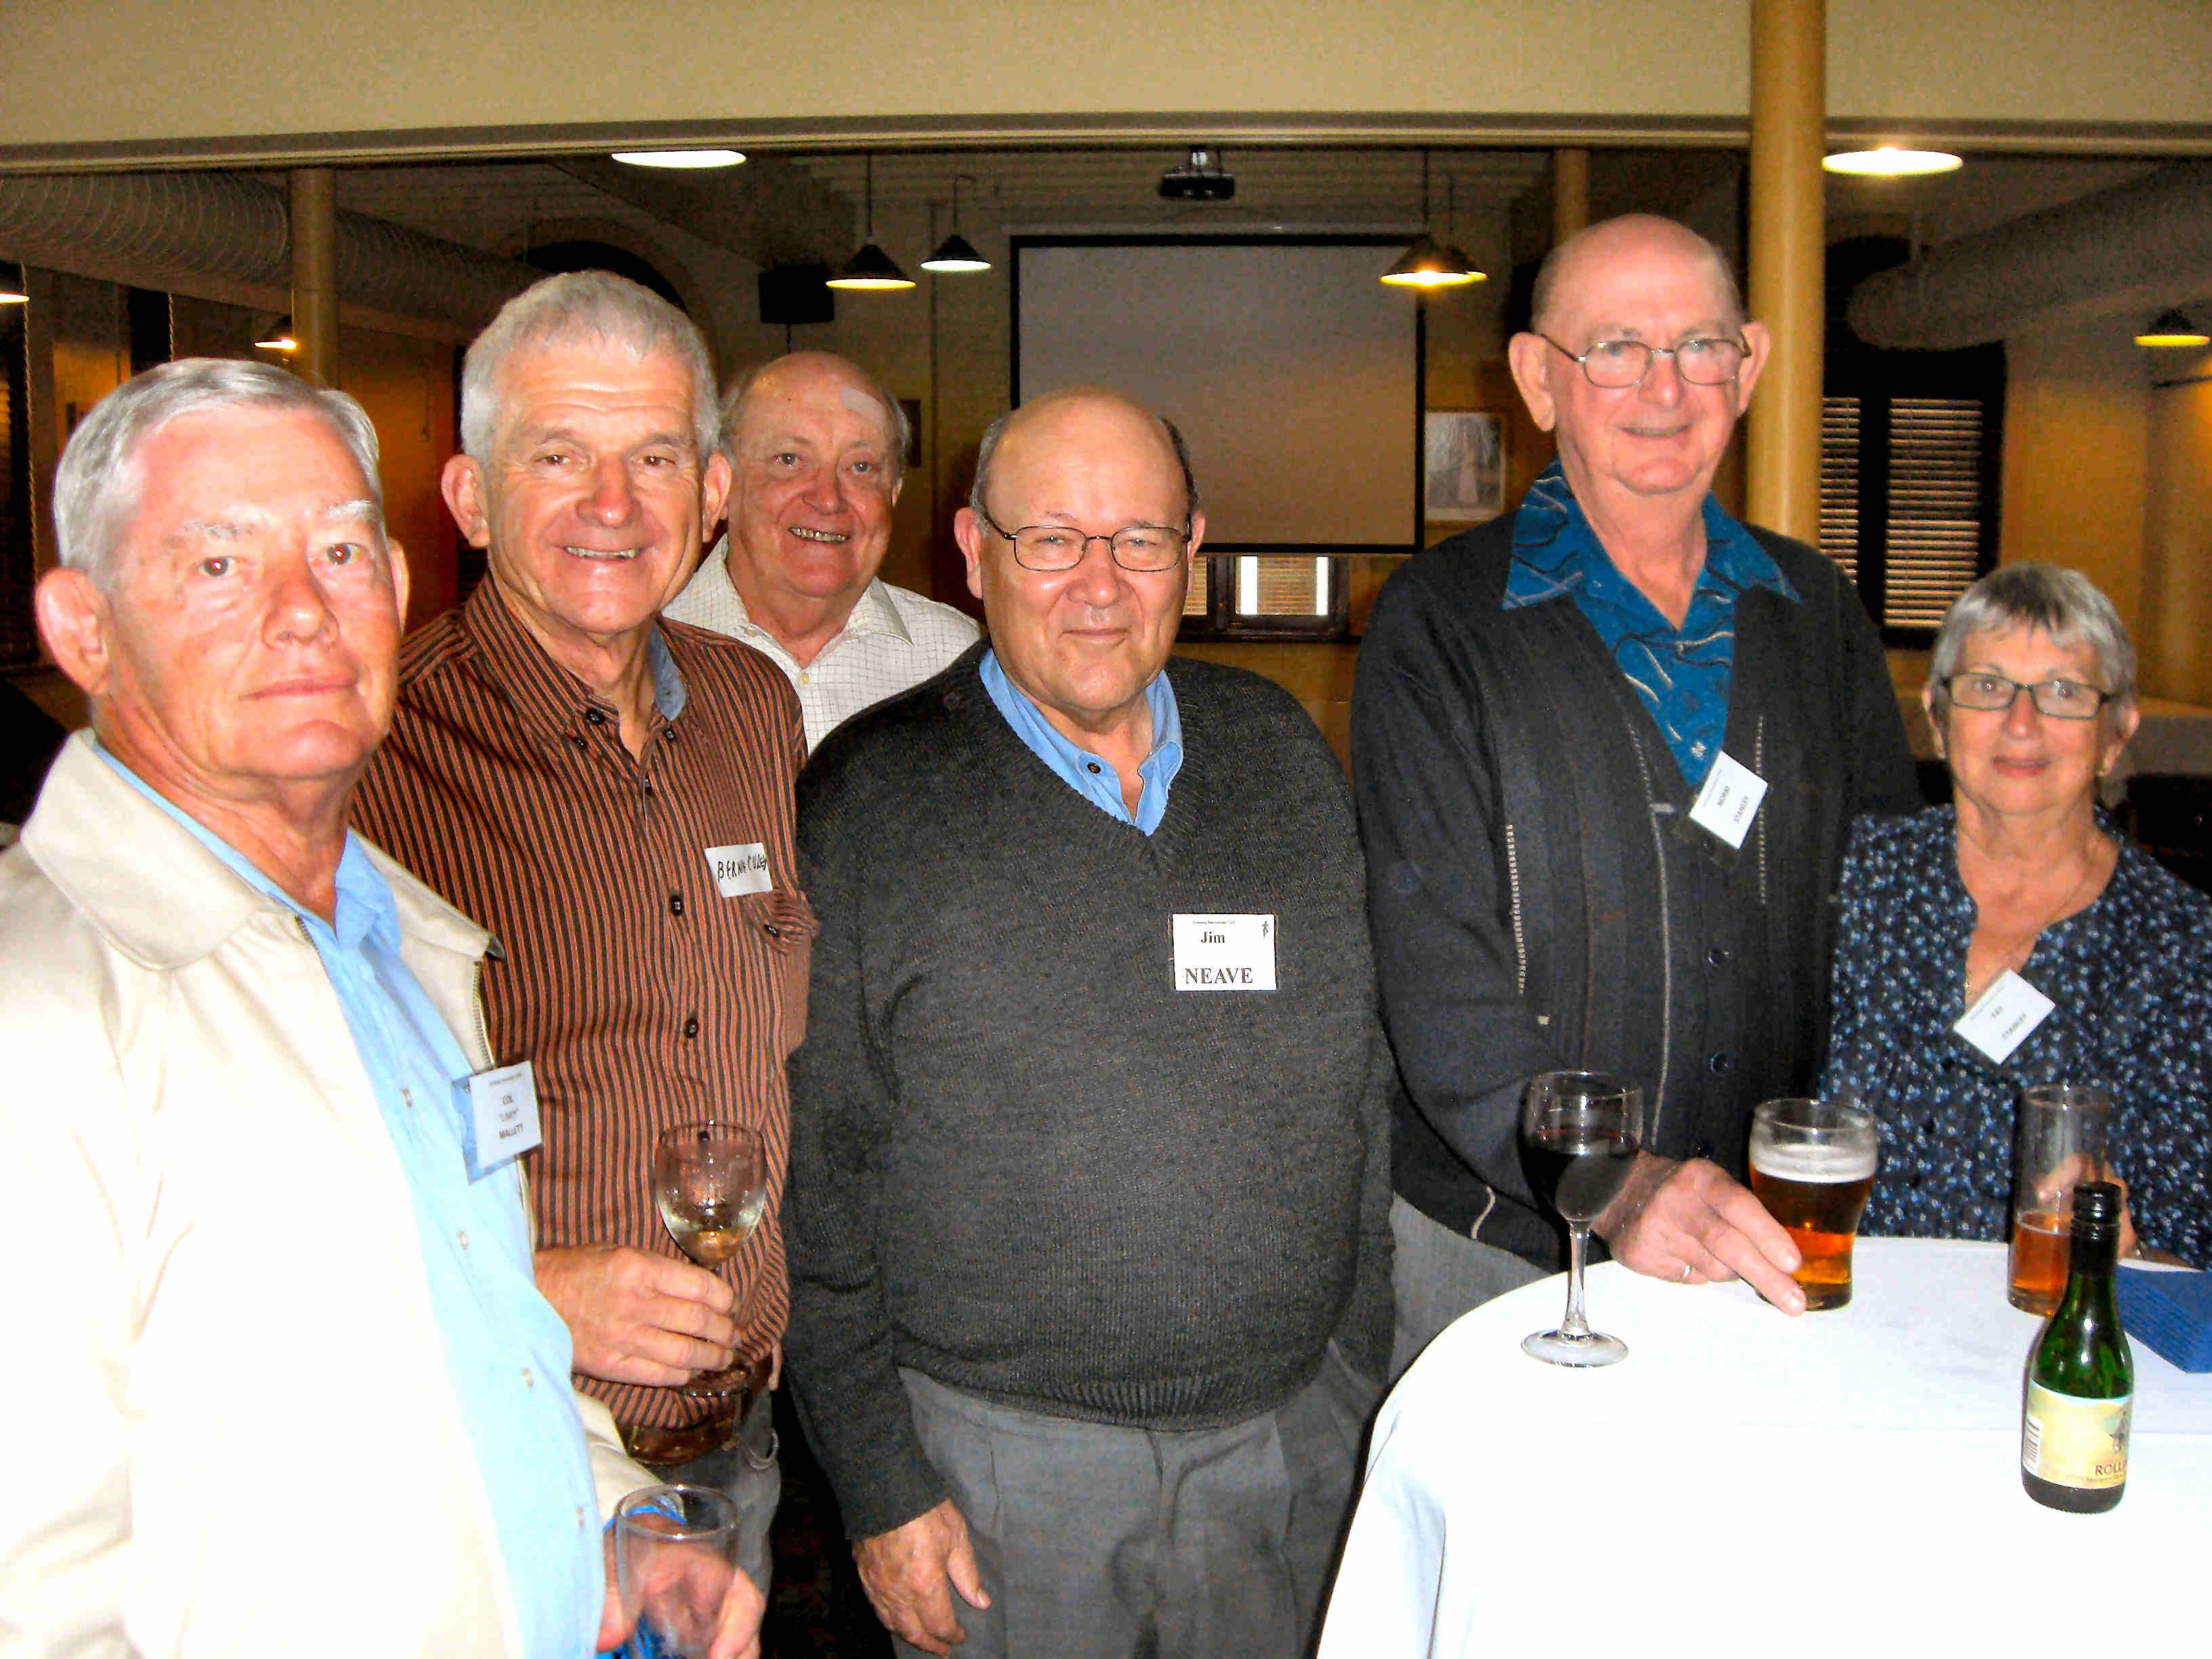 Col “Limpy” Mallett, Bernie Culley, Martin Lunn, Jim Neave, Norm and Fay Stanley